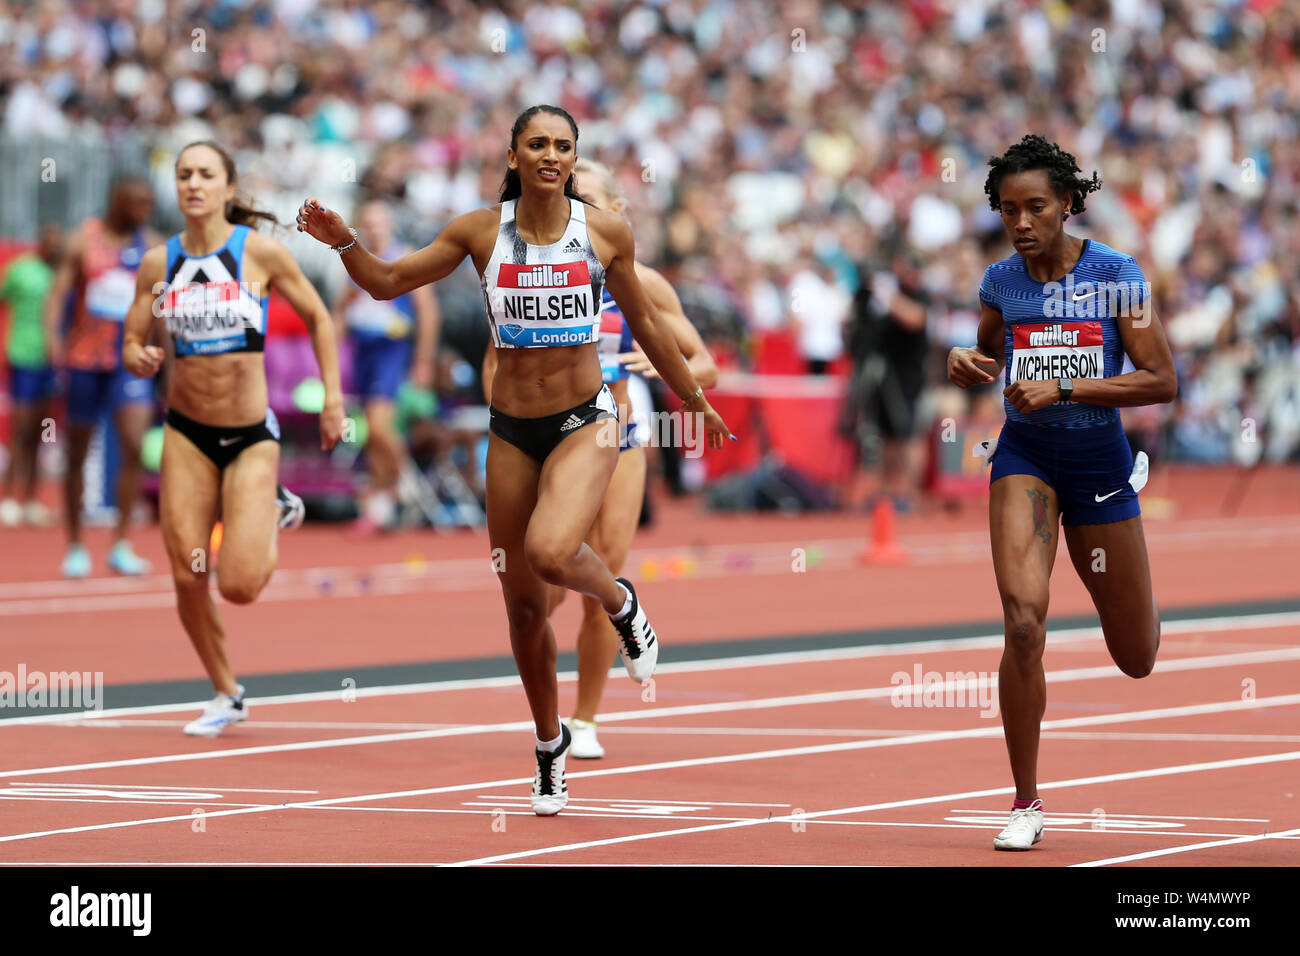 Laviai NIELSEN (Great Britain) and Stephenie Ann MCPHERSON (Jamaica), crossing the finish line in the Women's 400m Final at the 2019, IAAF Diamond League, Anniversary Games, Queen Elizabeth Olympic Park, Stratford, London, UK. Stock Photo